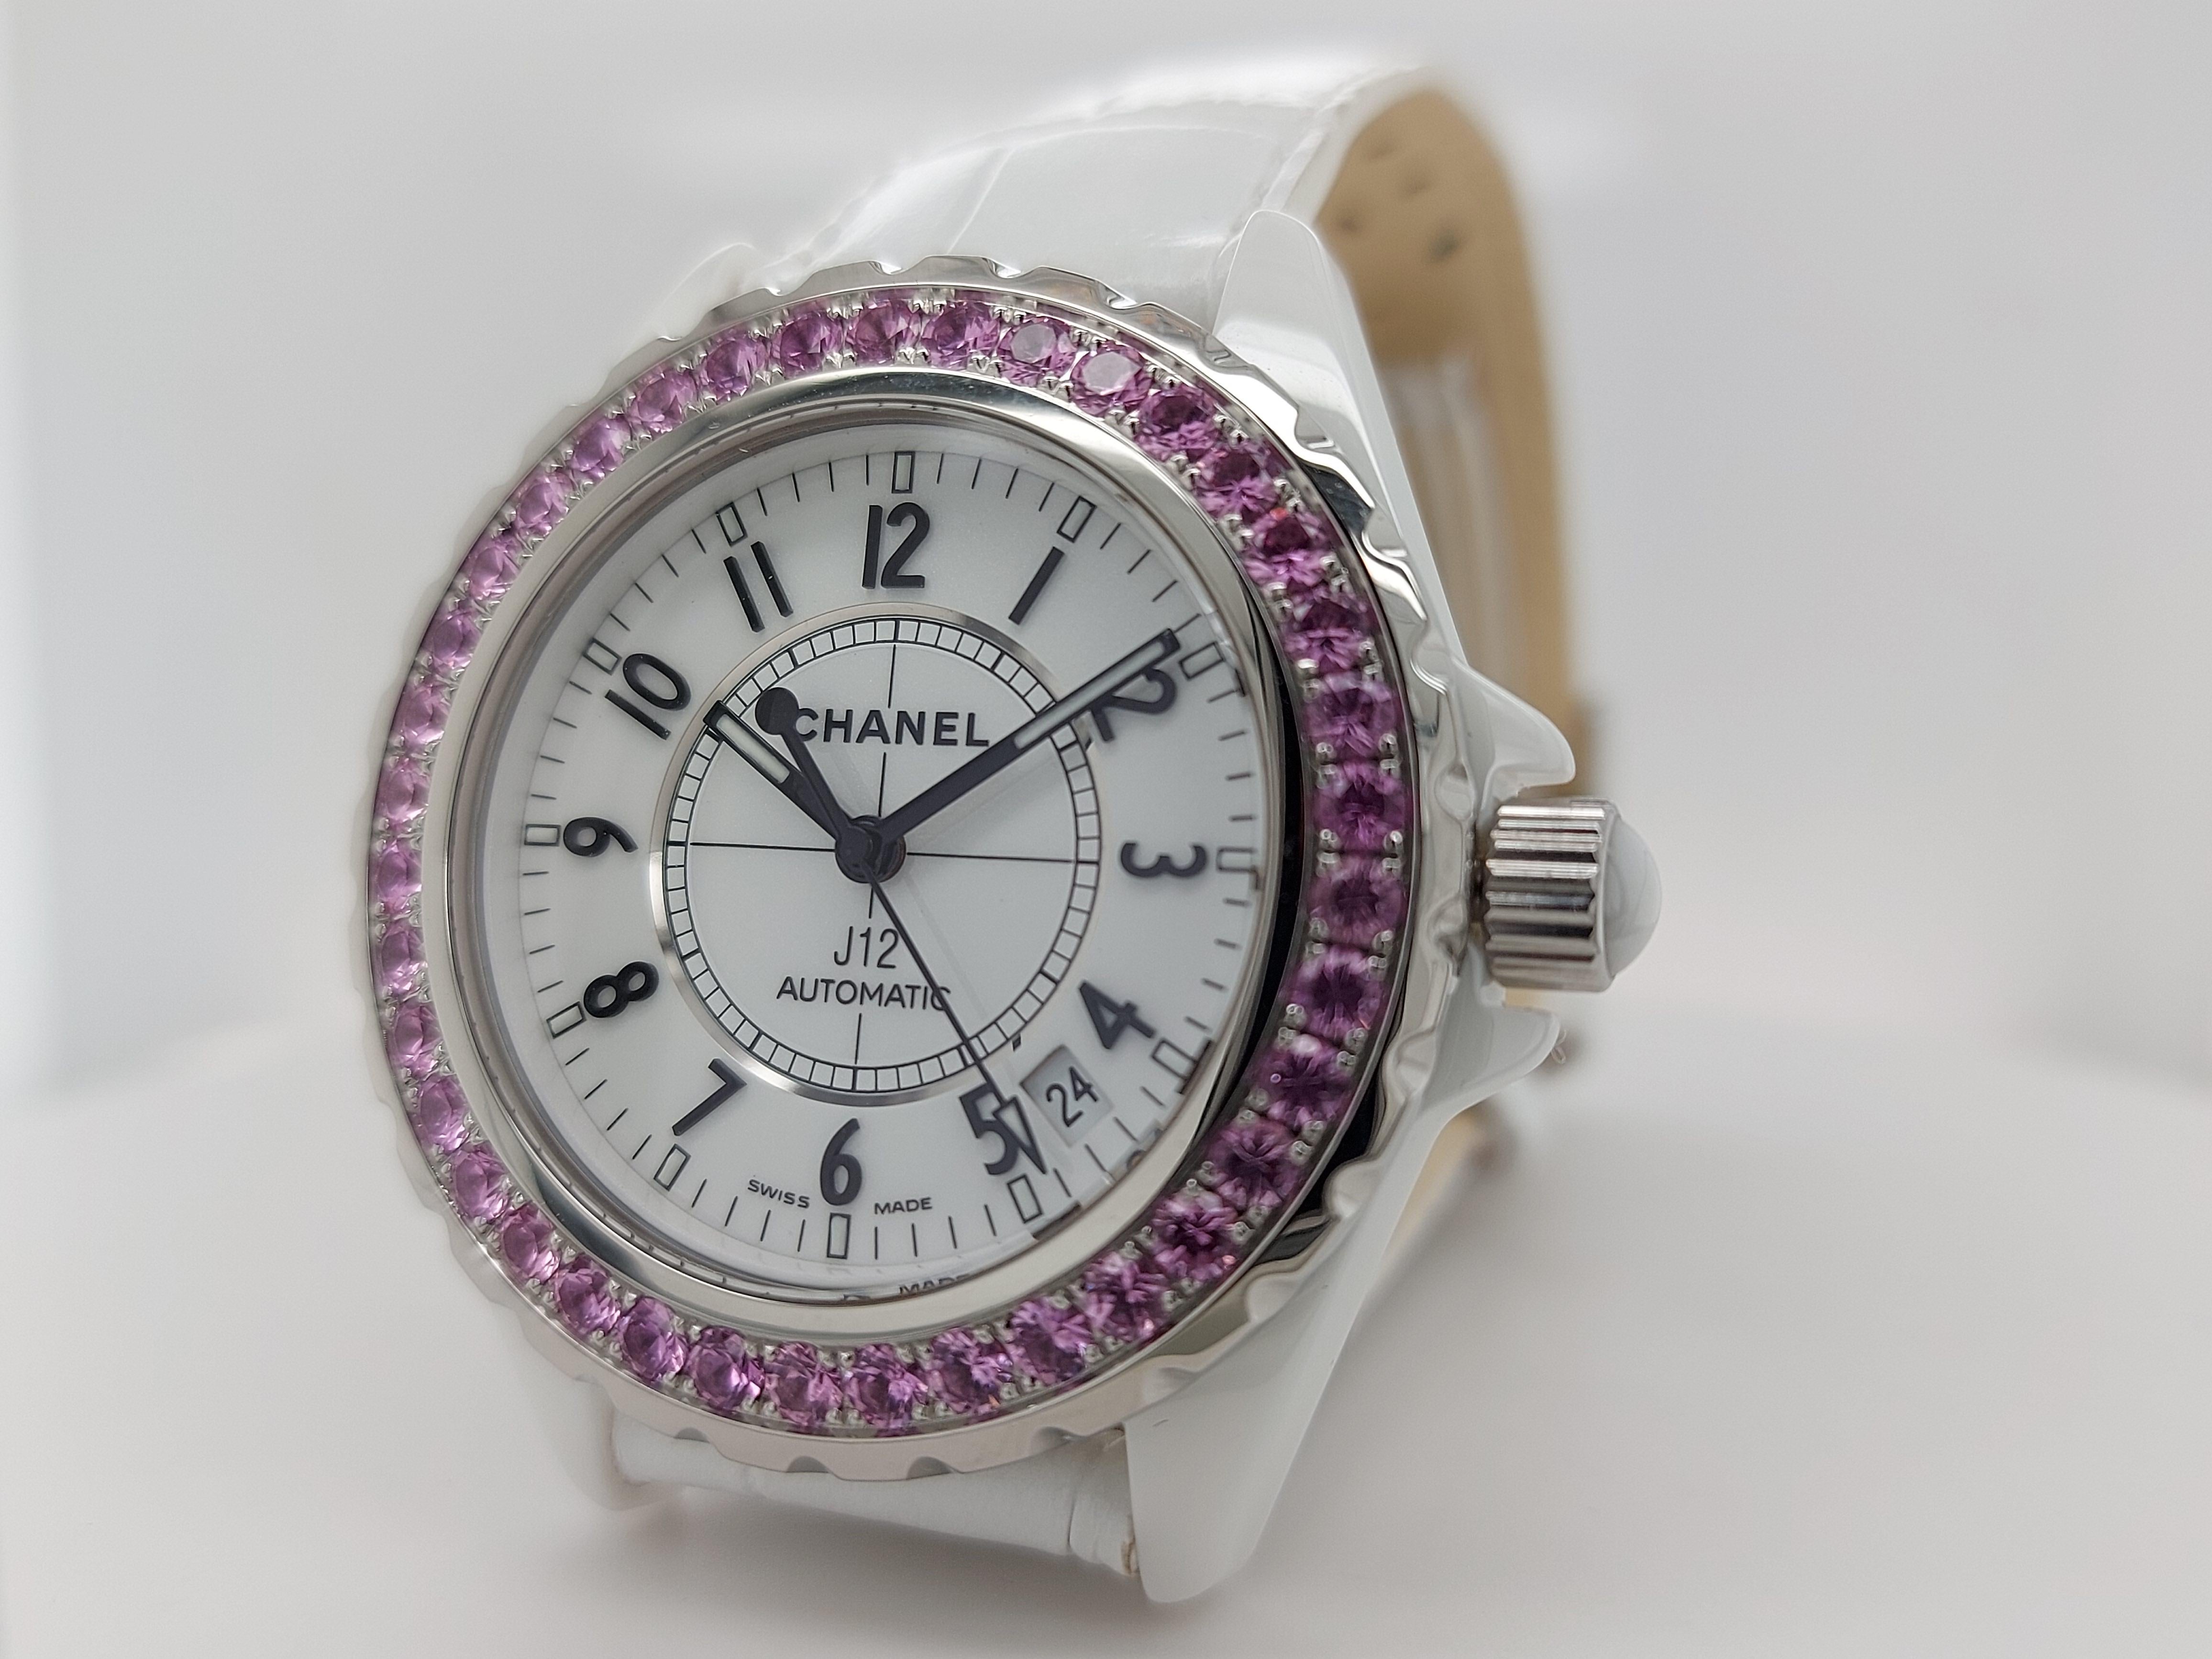 Round Cut Chanel J12, Automatic, Ceramic Case, with Pink Sapphires